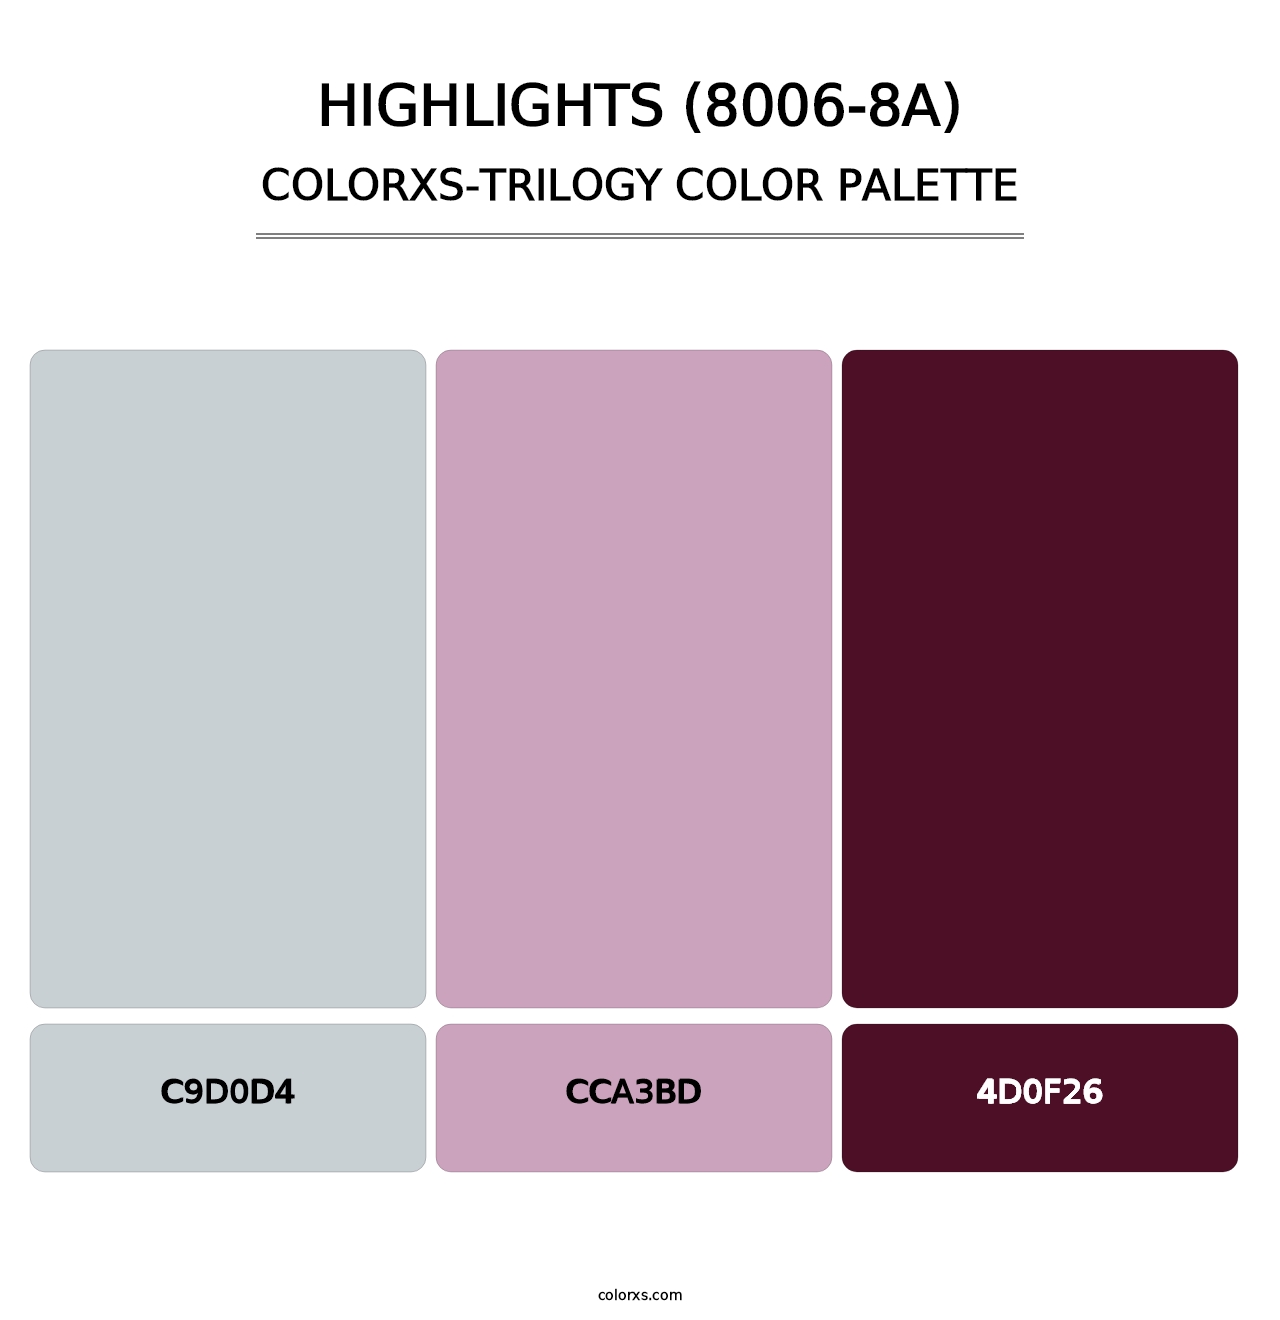 Highlights (8006-8A) - Colorxs Trilogy Palette